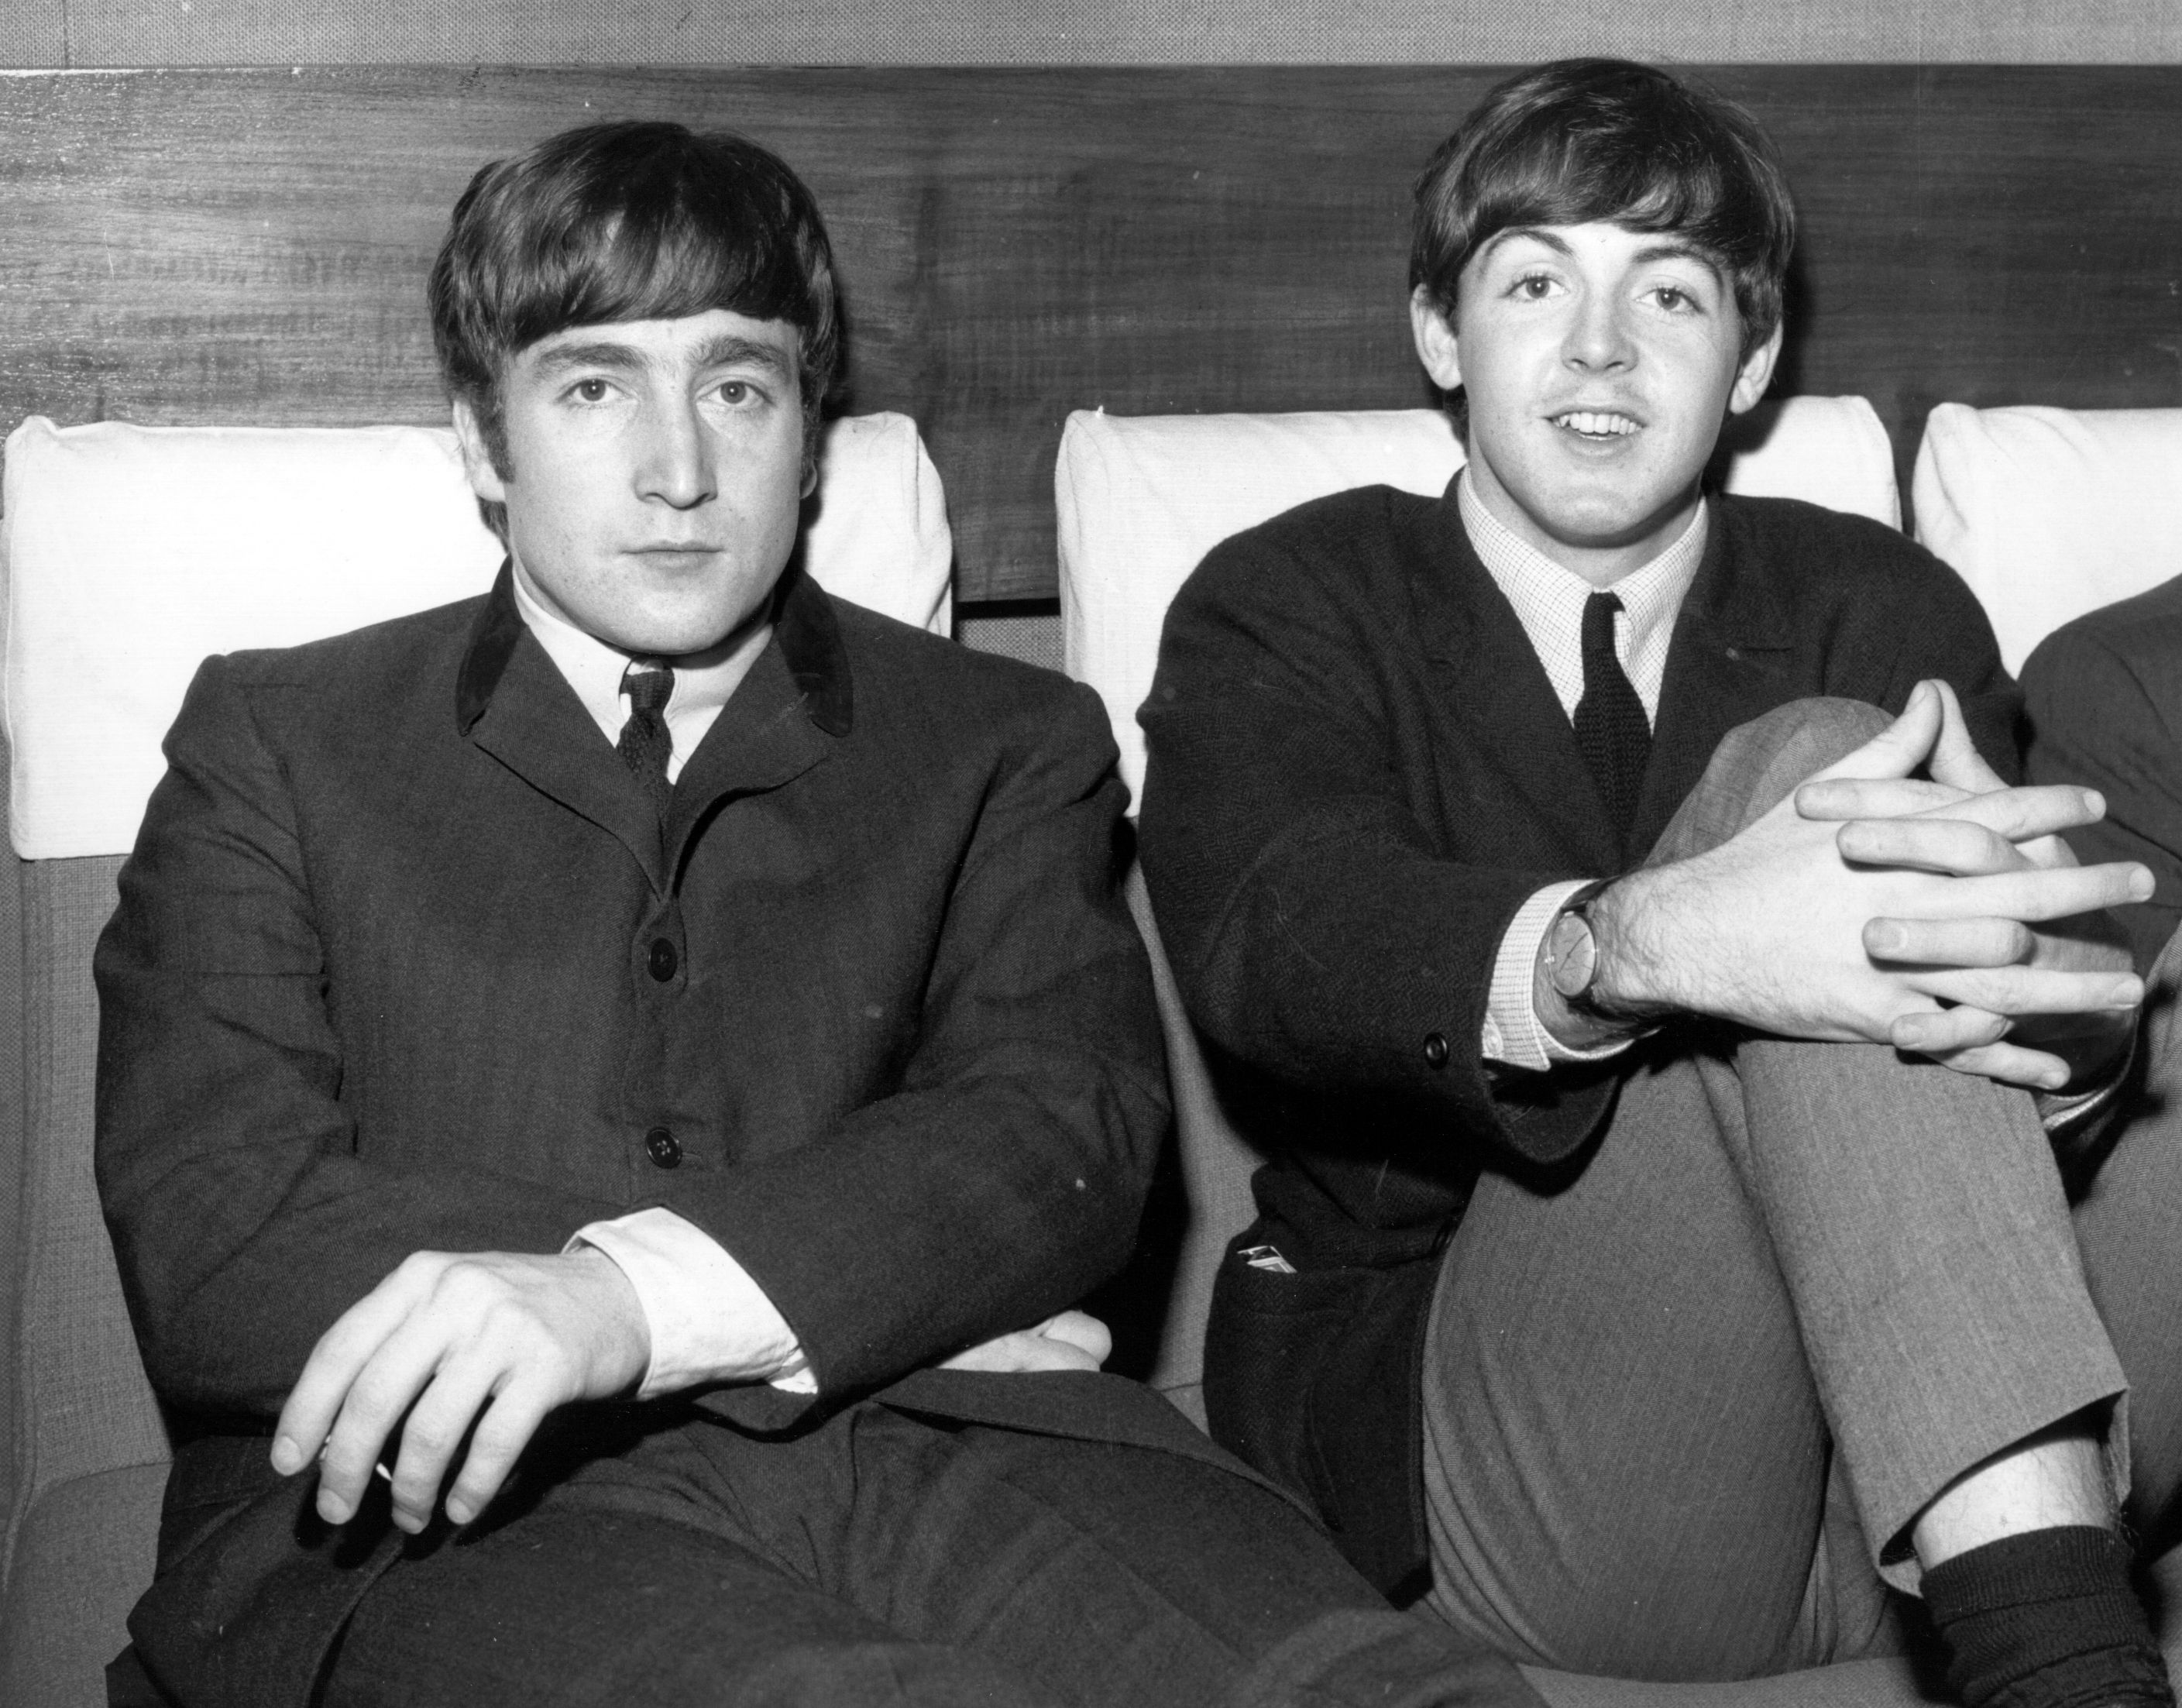 The Beatles' John Lennon and Paul McCartney in suits